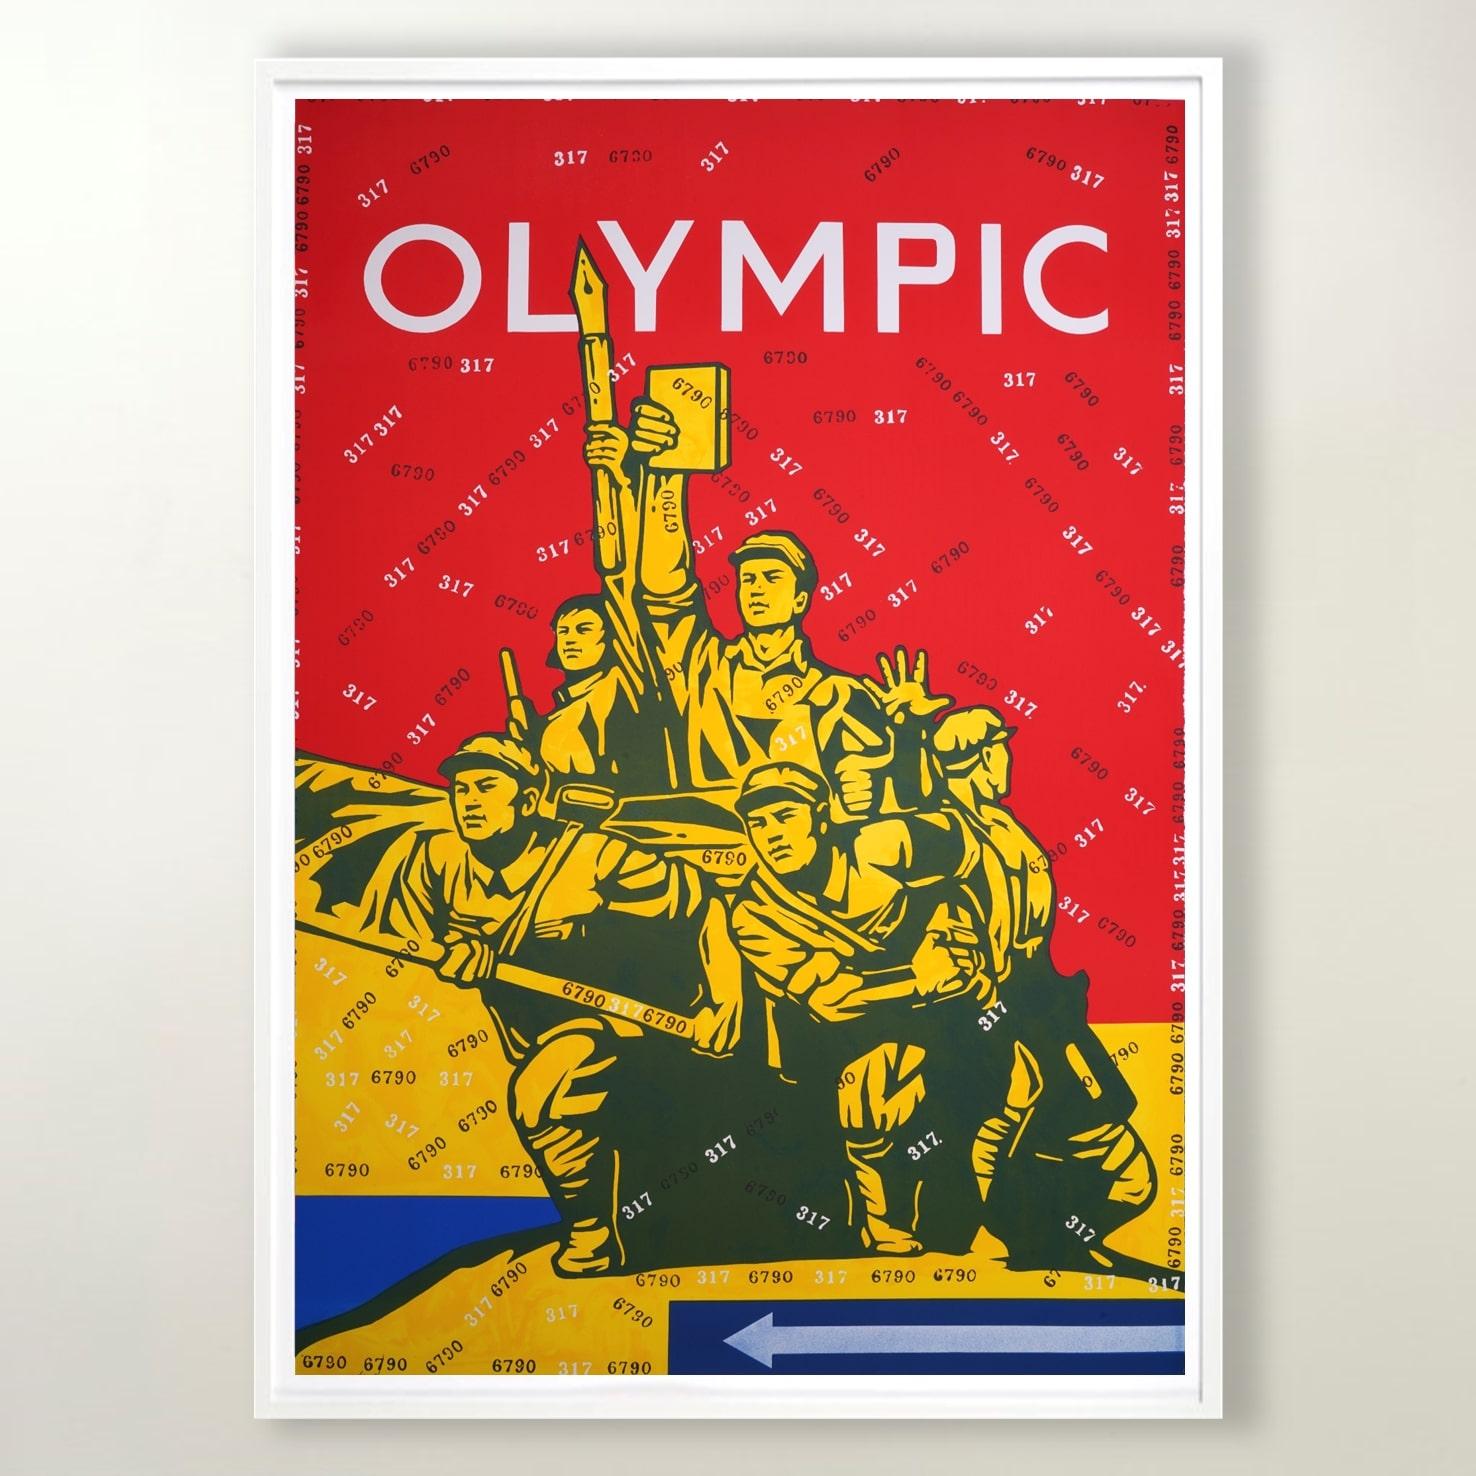 Olympic I - Contemporary, 21st Century, Lithograph, Limited Edition, Chinese art - Print by Wang Guangyi